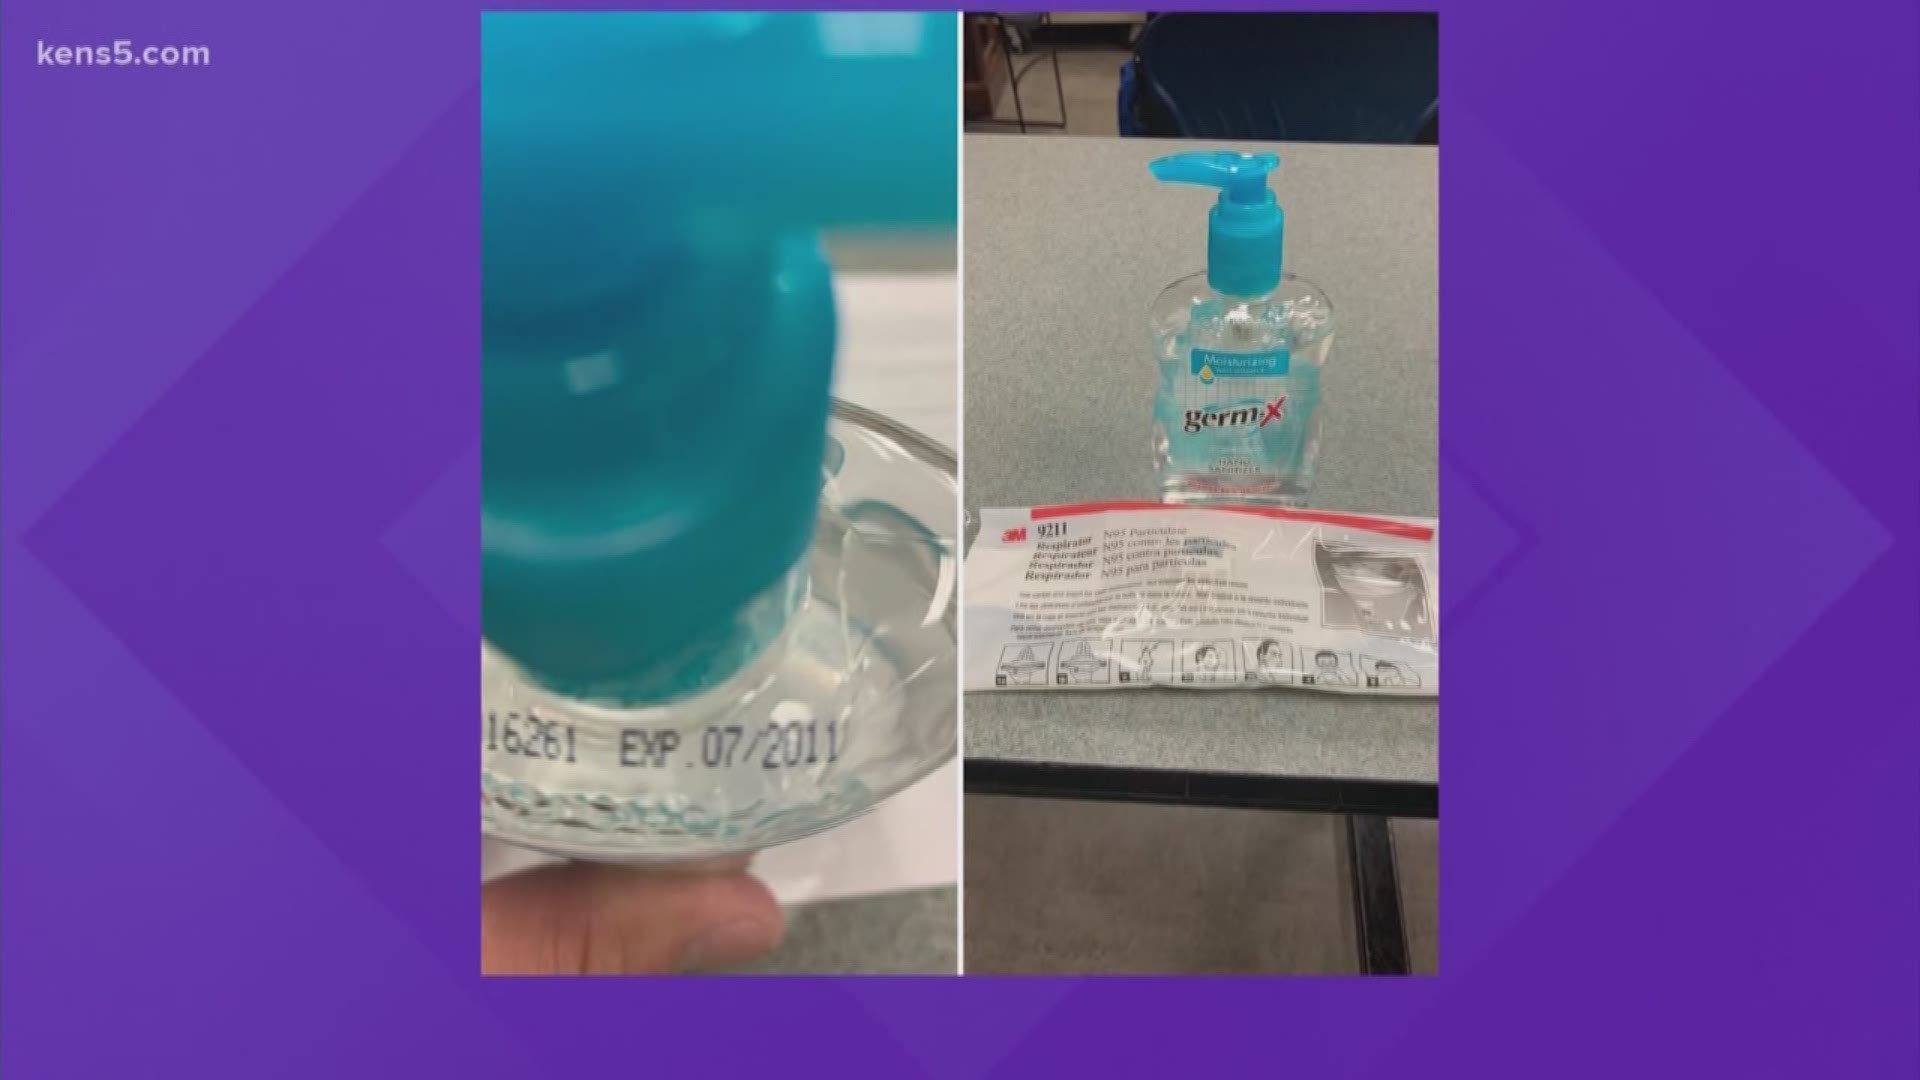 The San Antonio Police Officers Association says the police department gave officers expired hand sanitizer, and that they aren't handing out enough protective gear.